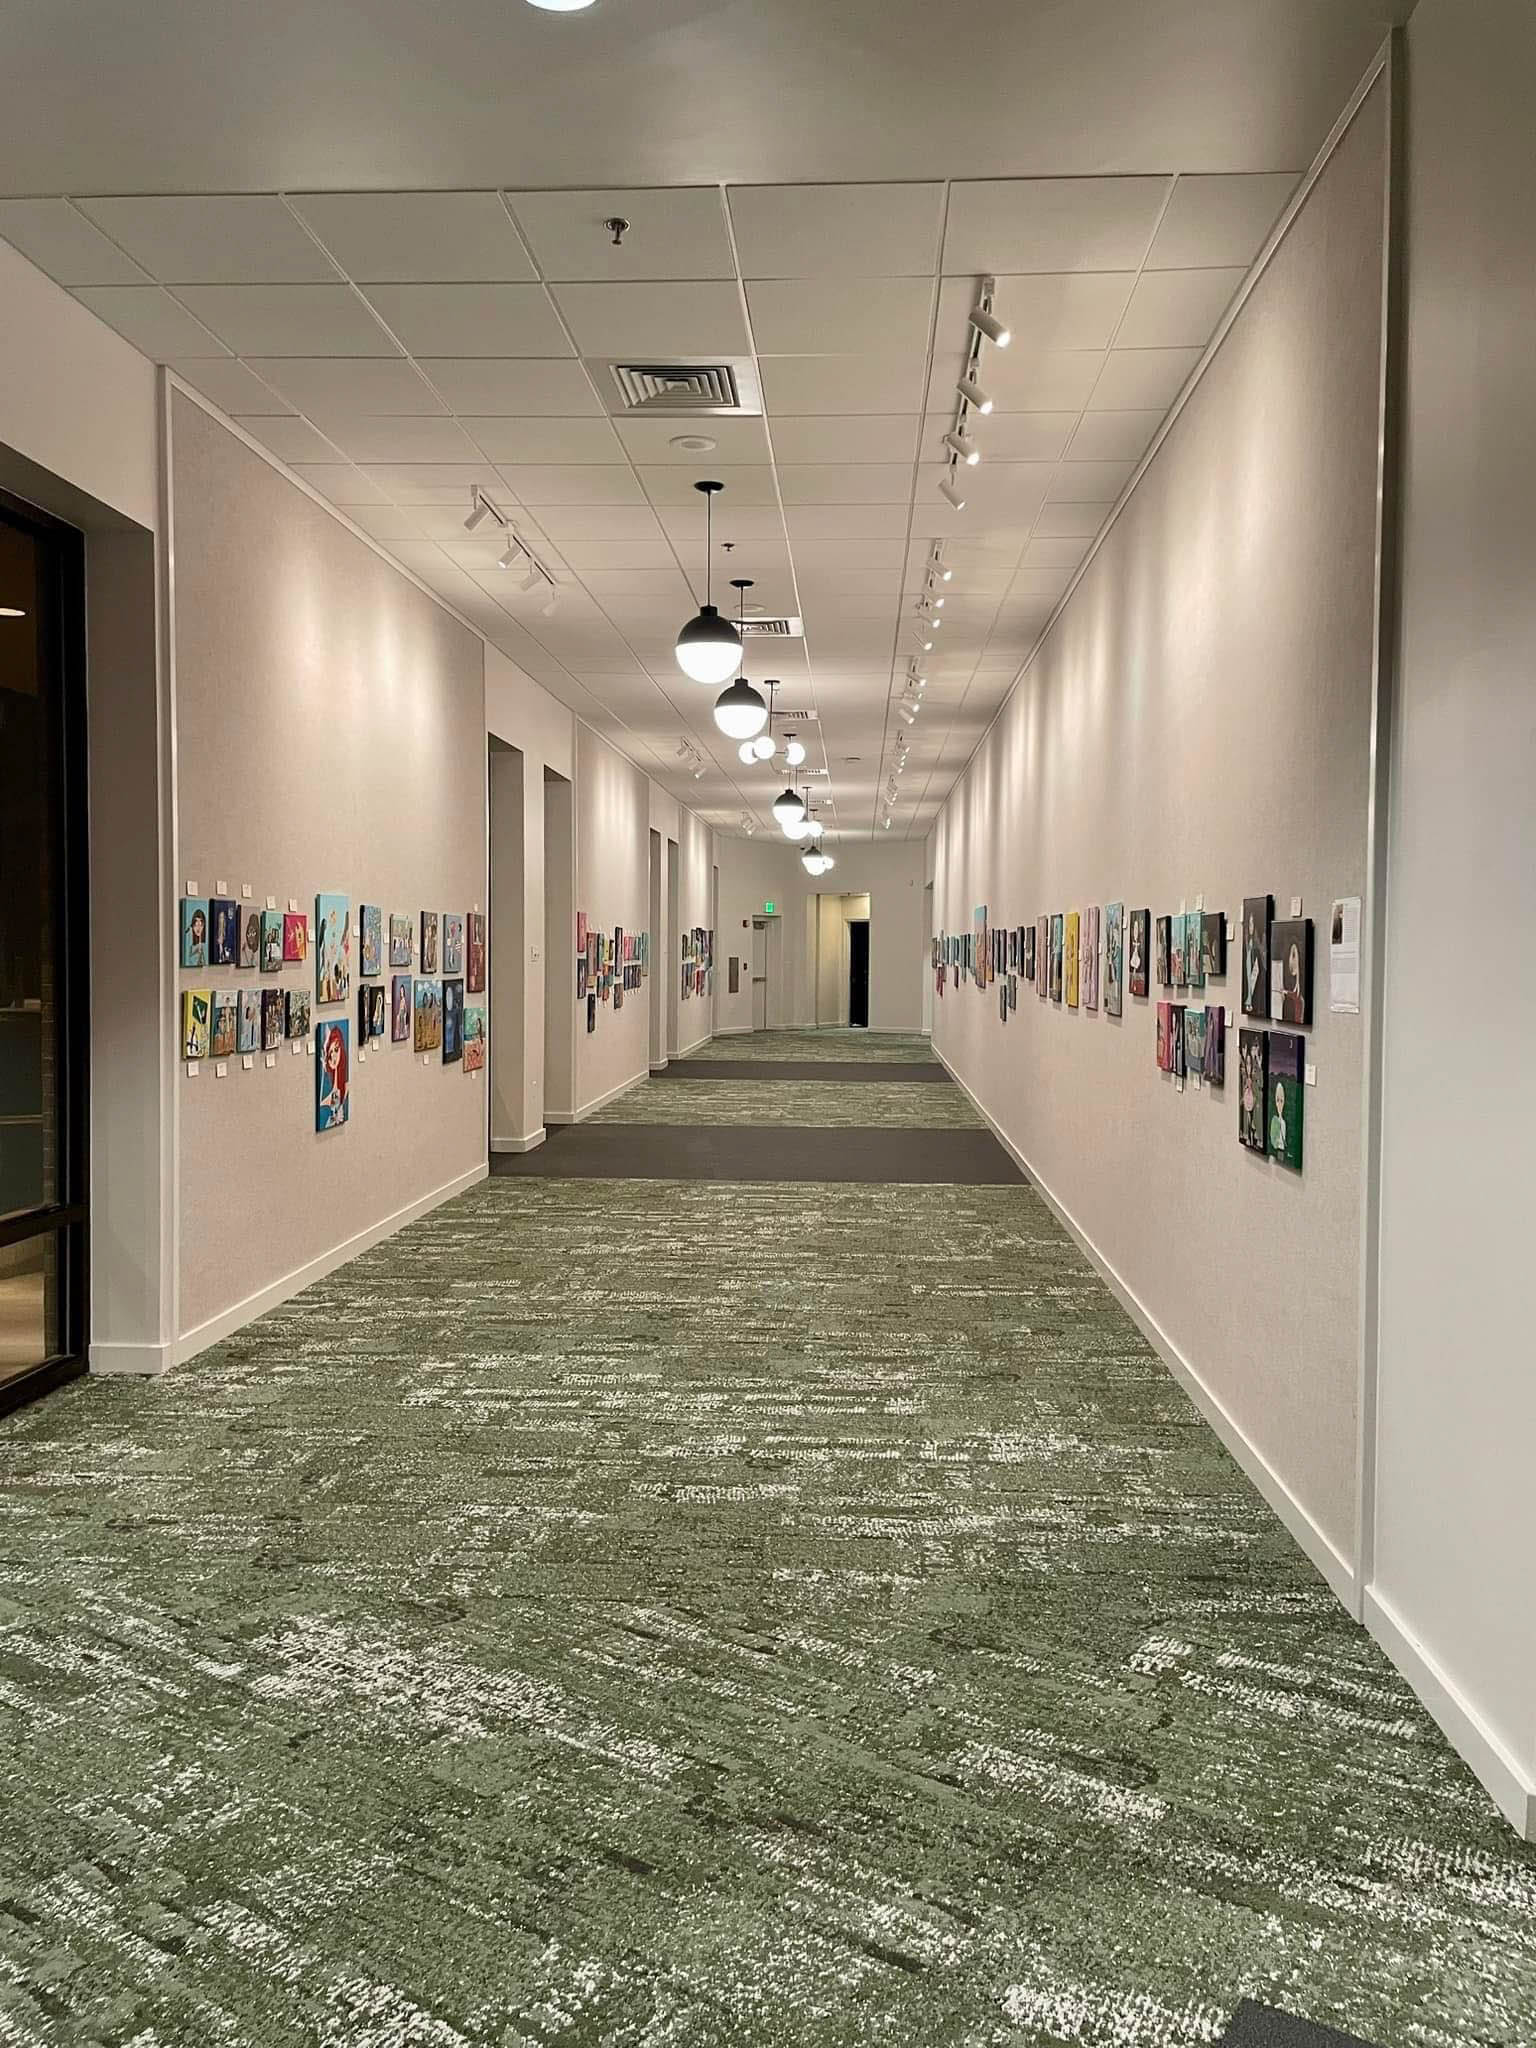 a hallway with art on the walls all the way down.